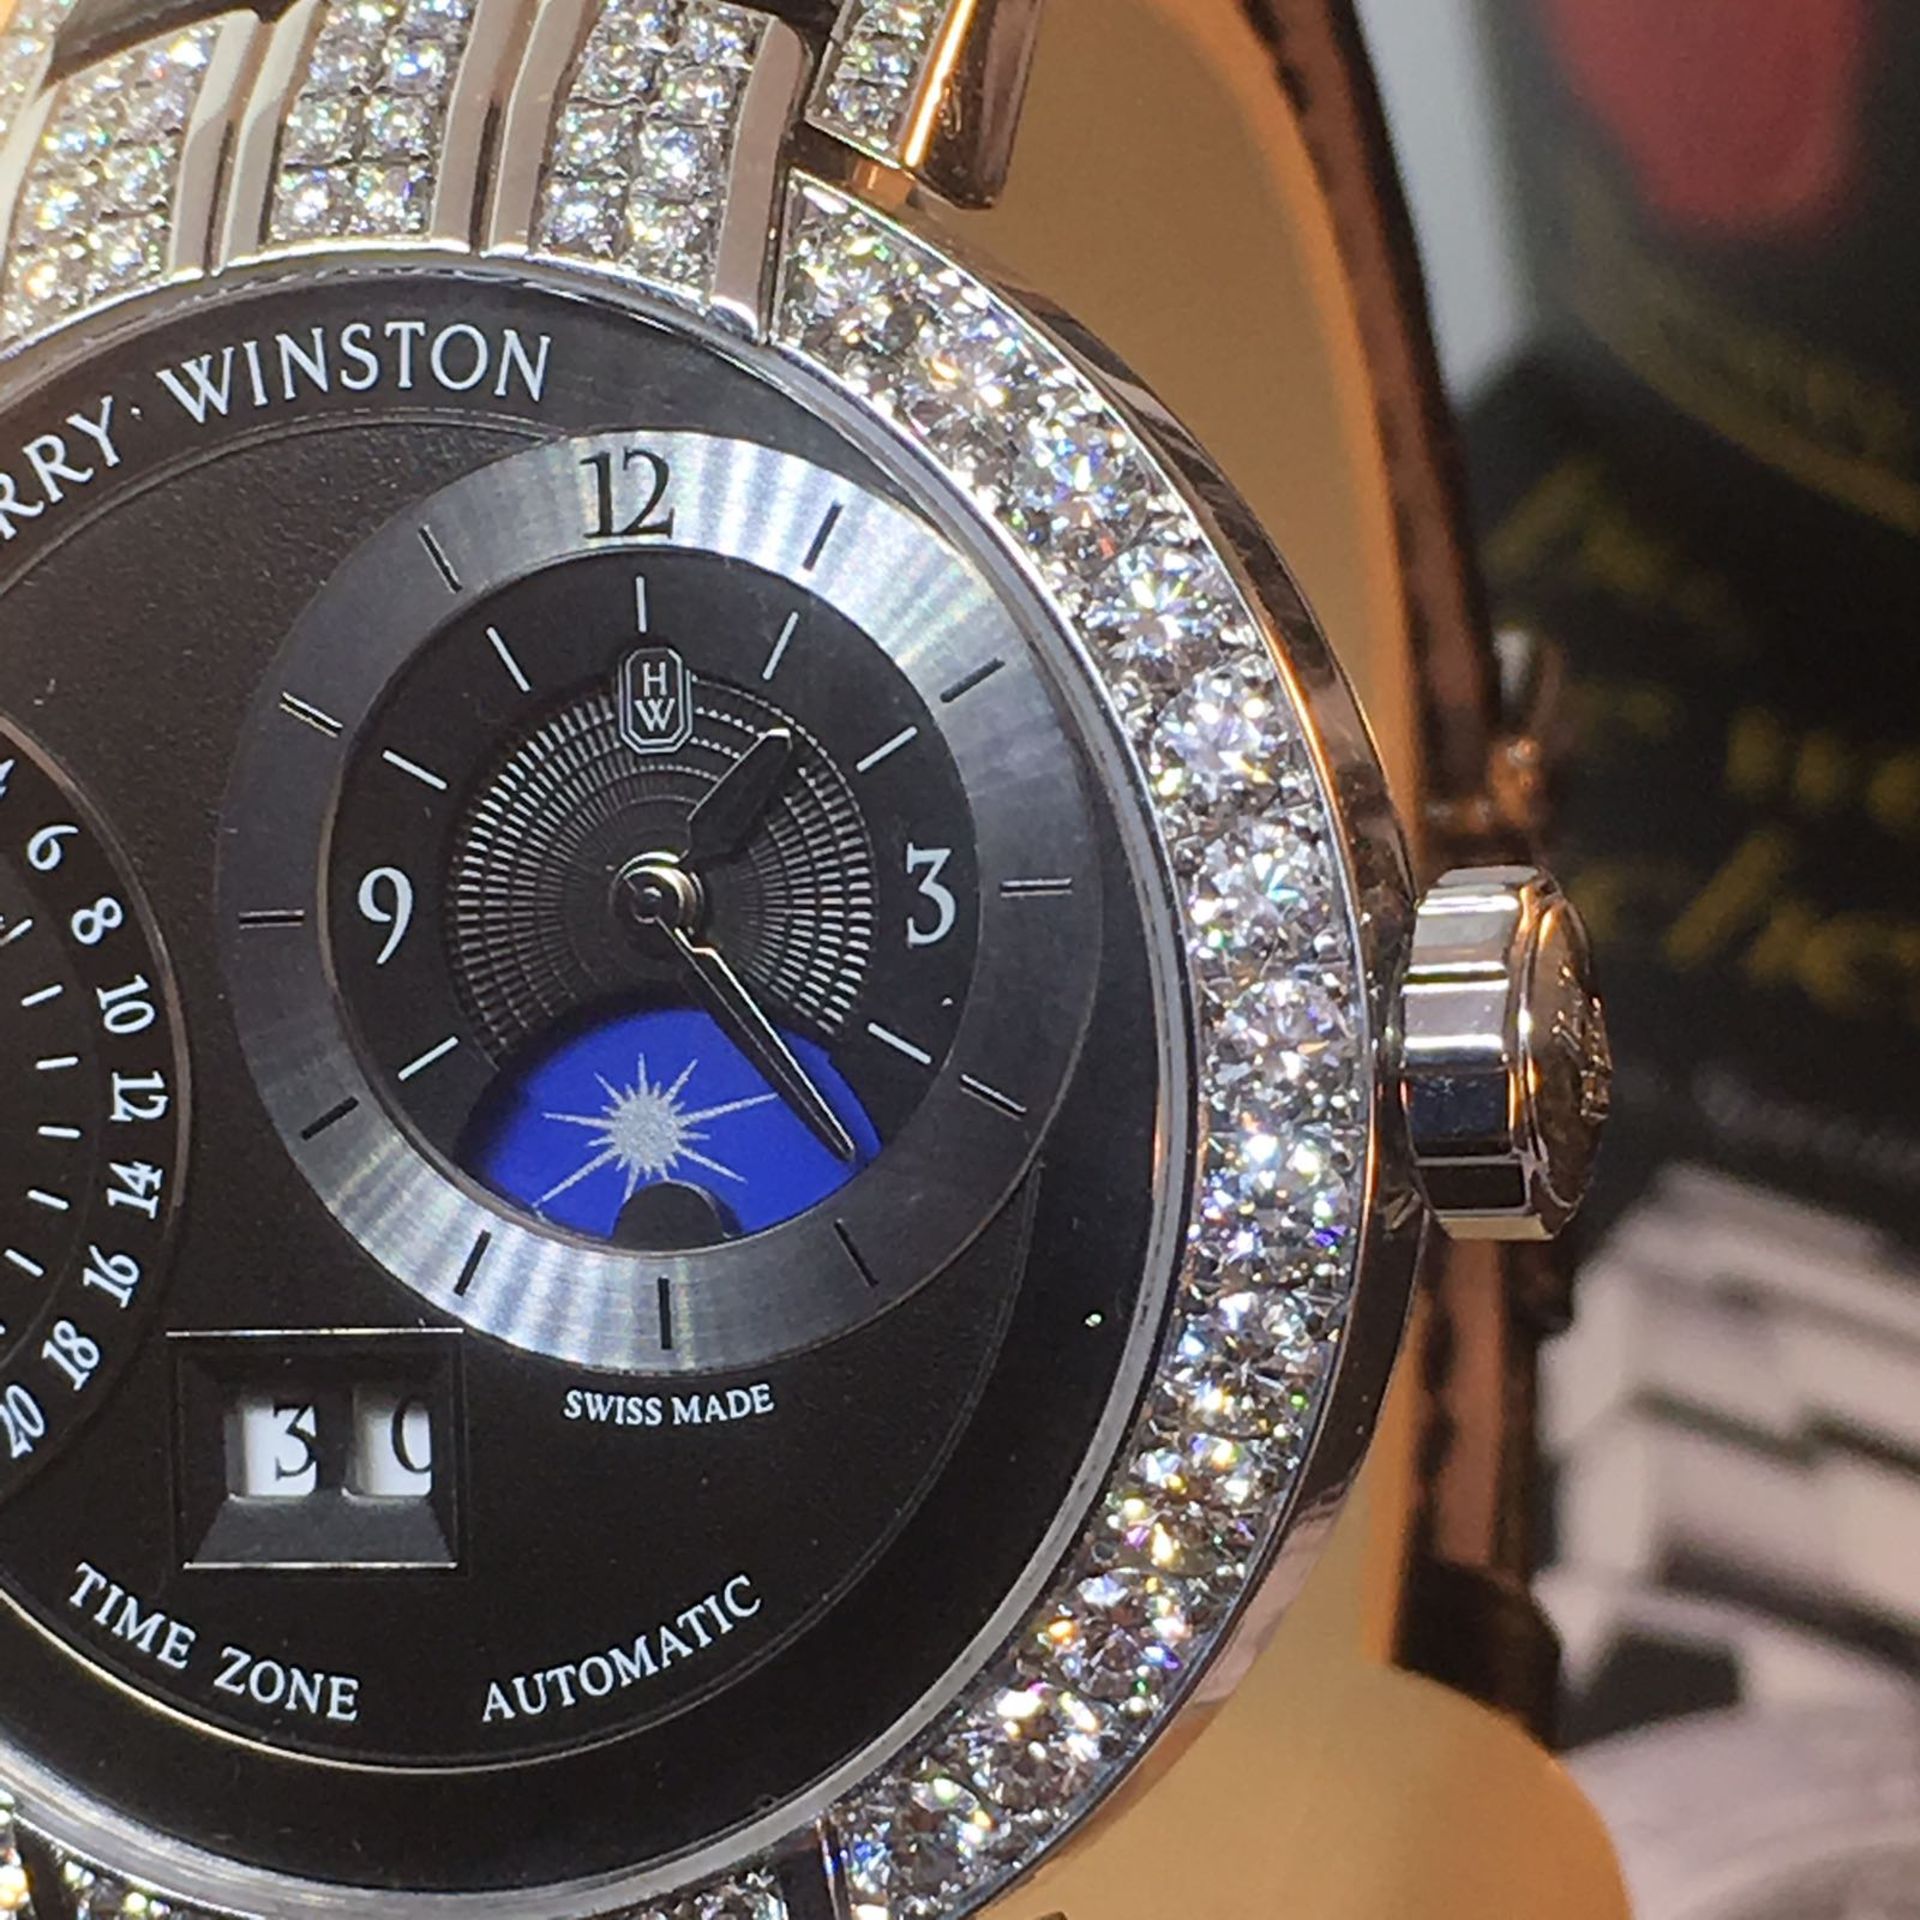 HARRY WINSTON Premier Excenter 18k White Gold Watch with box & papers - Image 4 of 9